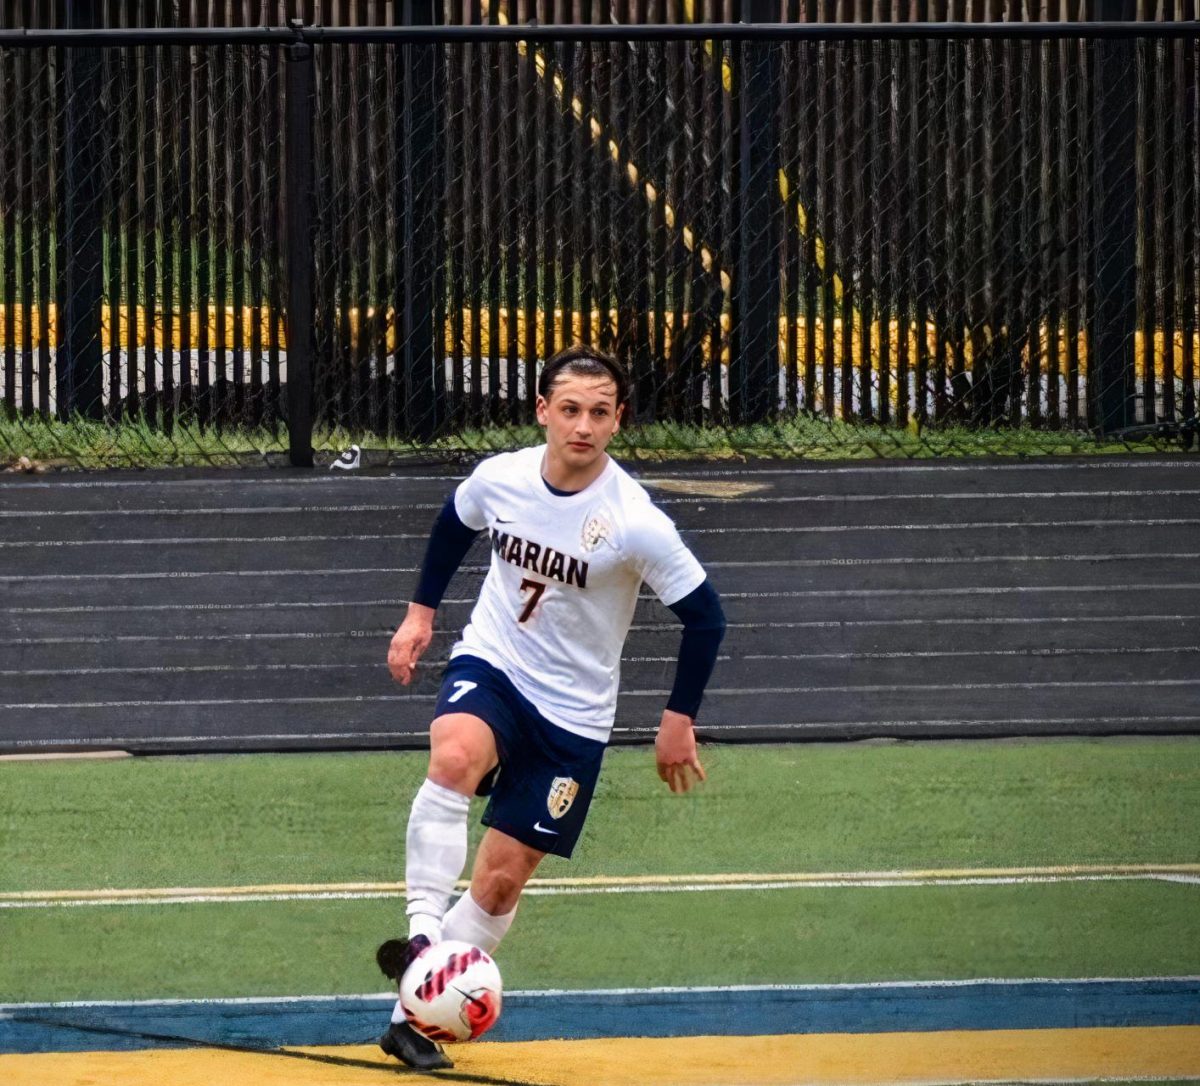 Former exchange student Anton Bezborodow plays soccer for Marian University. 
Photo contributed by Bezborodow